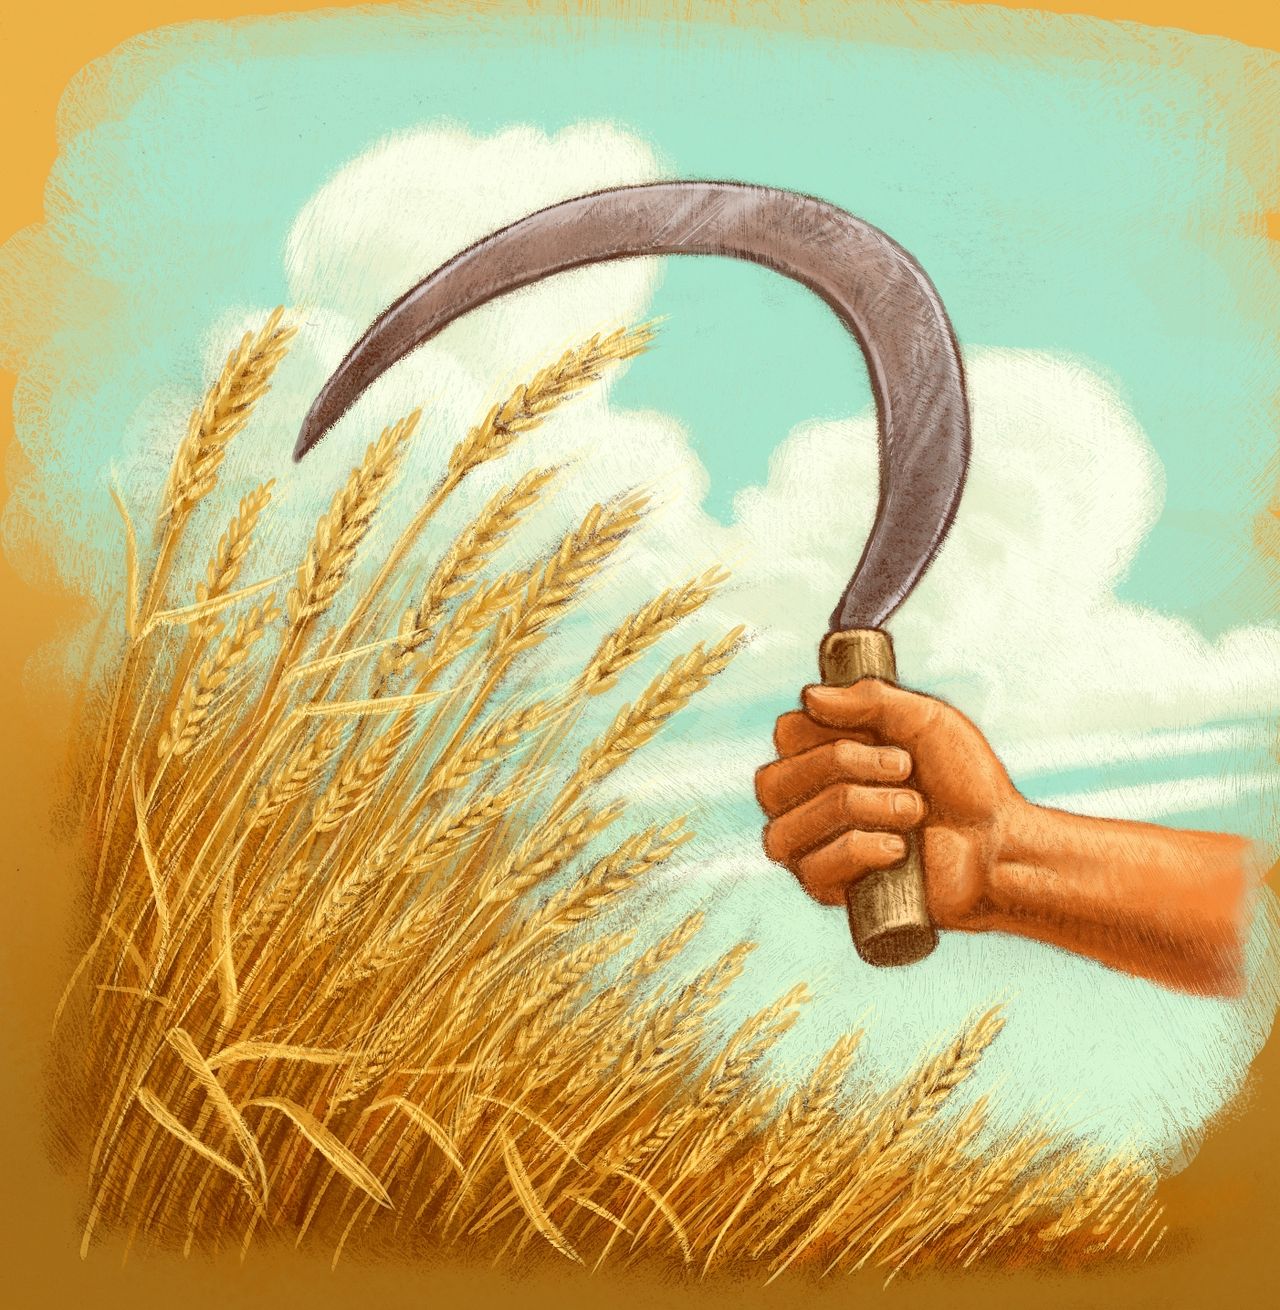 An illustration of a hand holding a sickle, prepared to harvest wheat.